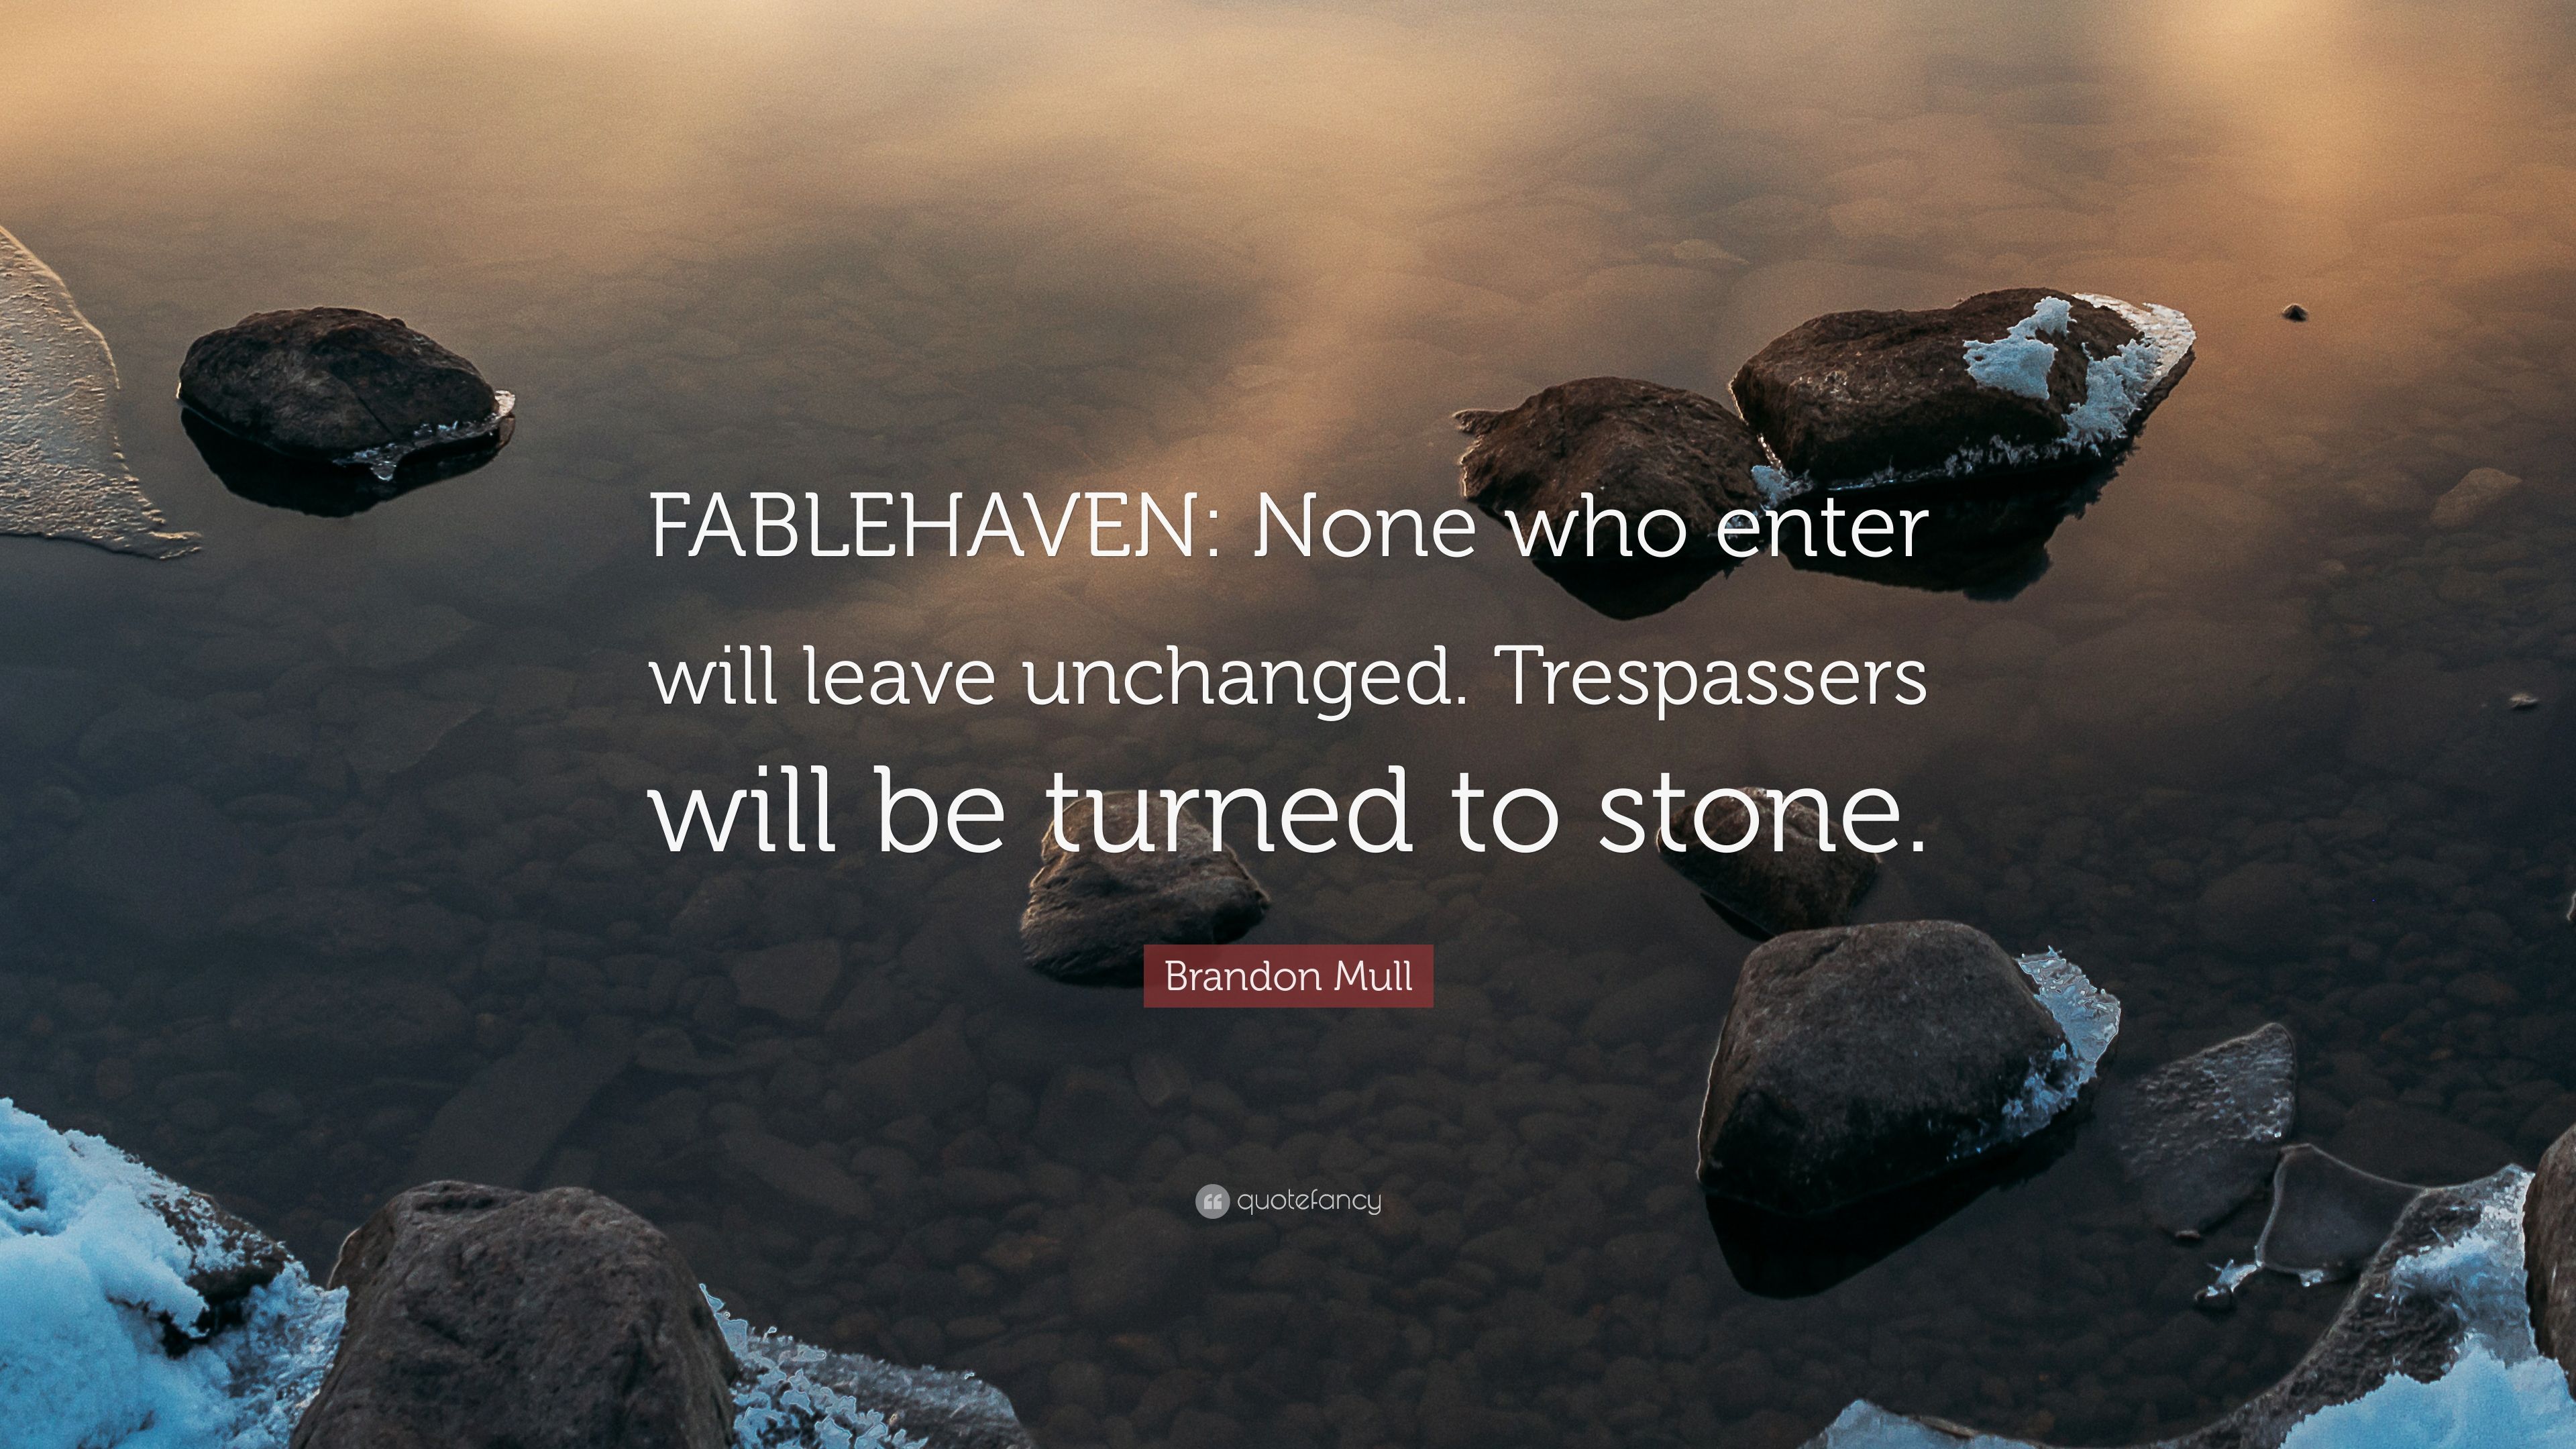 Brandon Mull Quote: “FABLEHAVEN: None who enter will leave unchanged. Trespassers will be turned to stone.”